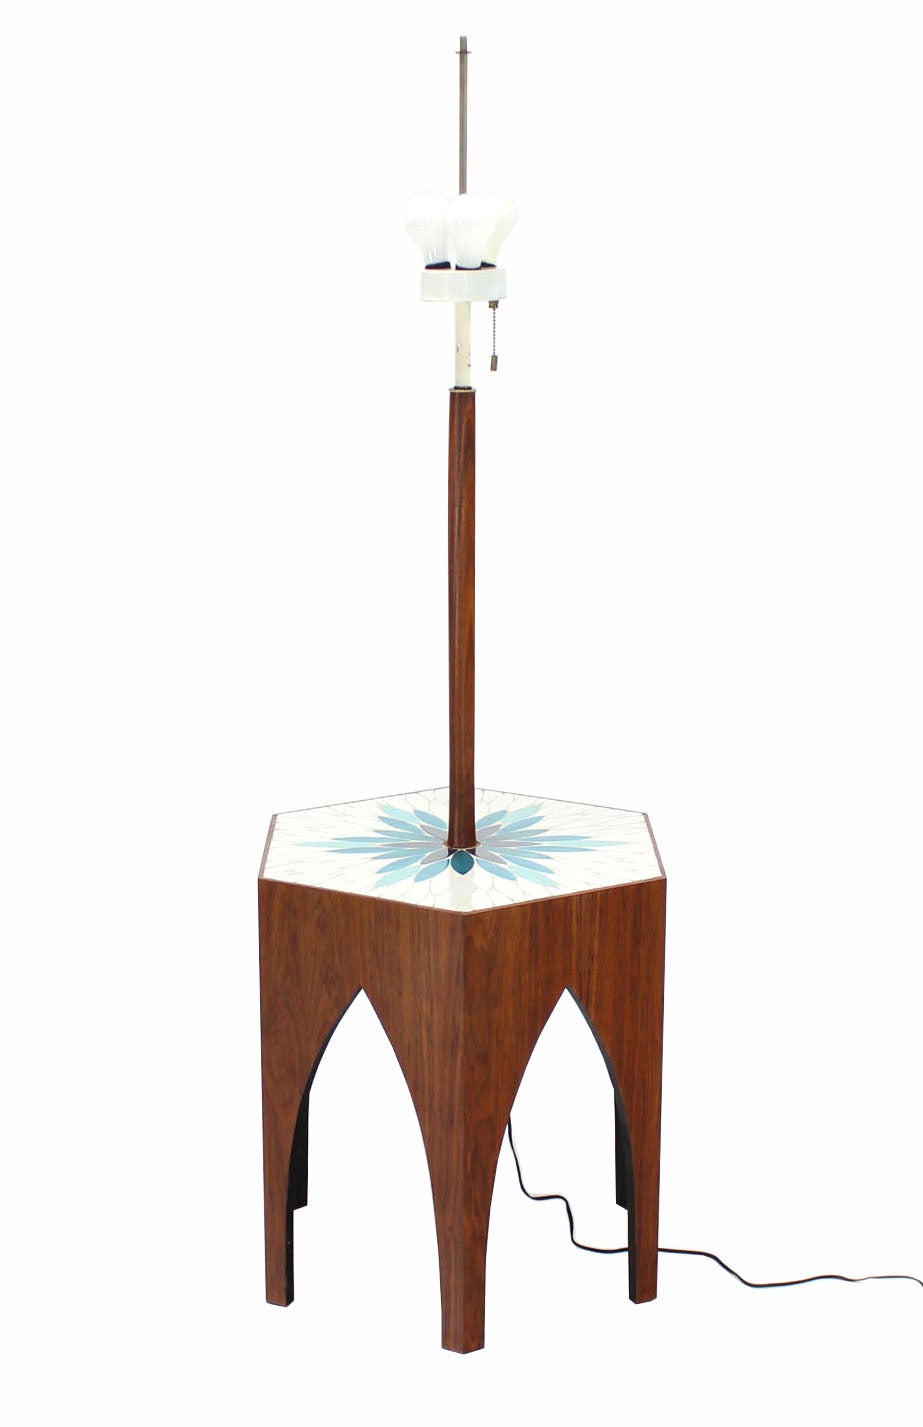 Very nice tile pattern walnut base floor lamp with table.